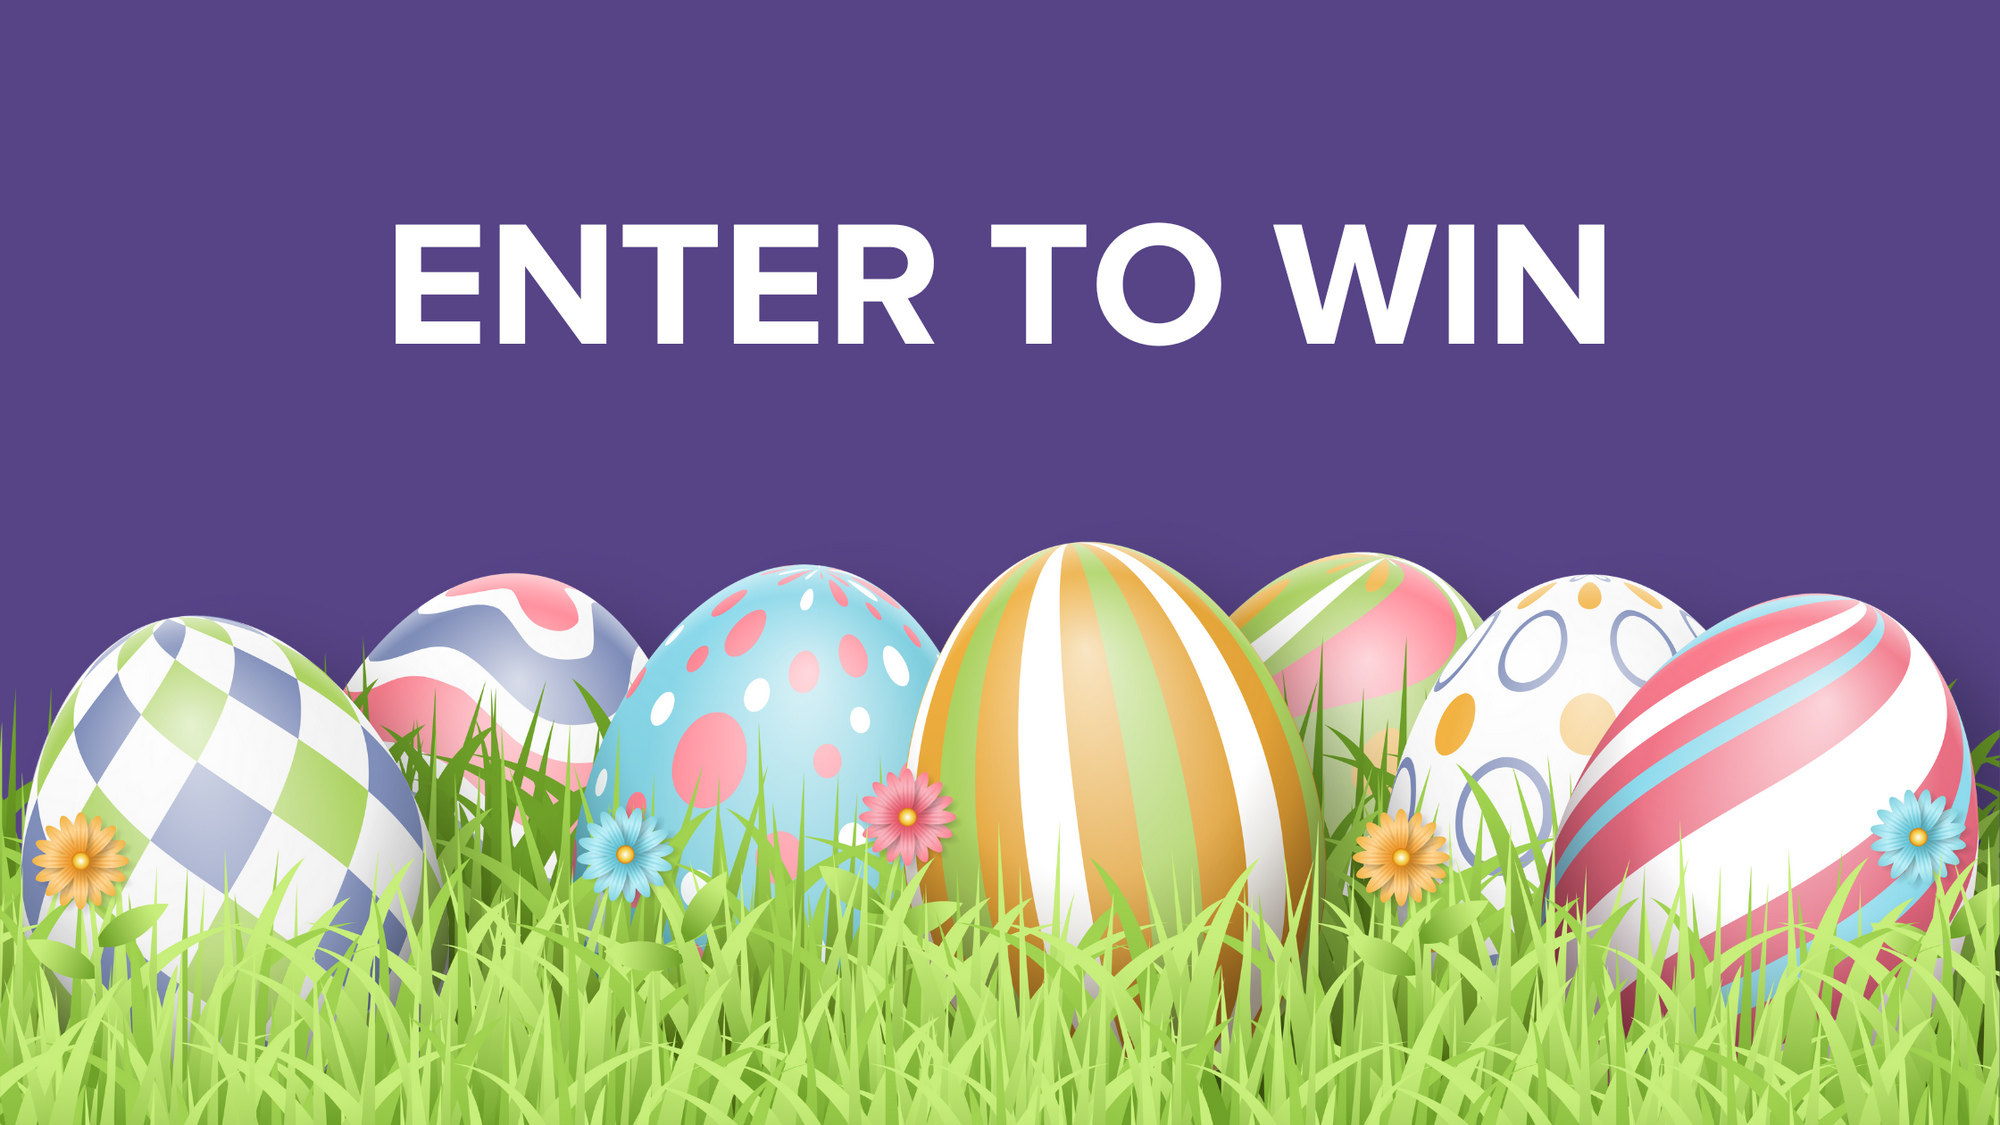 You could win 24 boxes from Foldabox this Easter